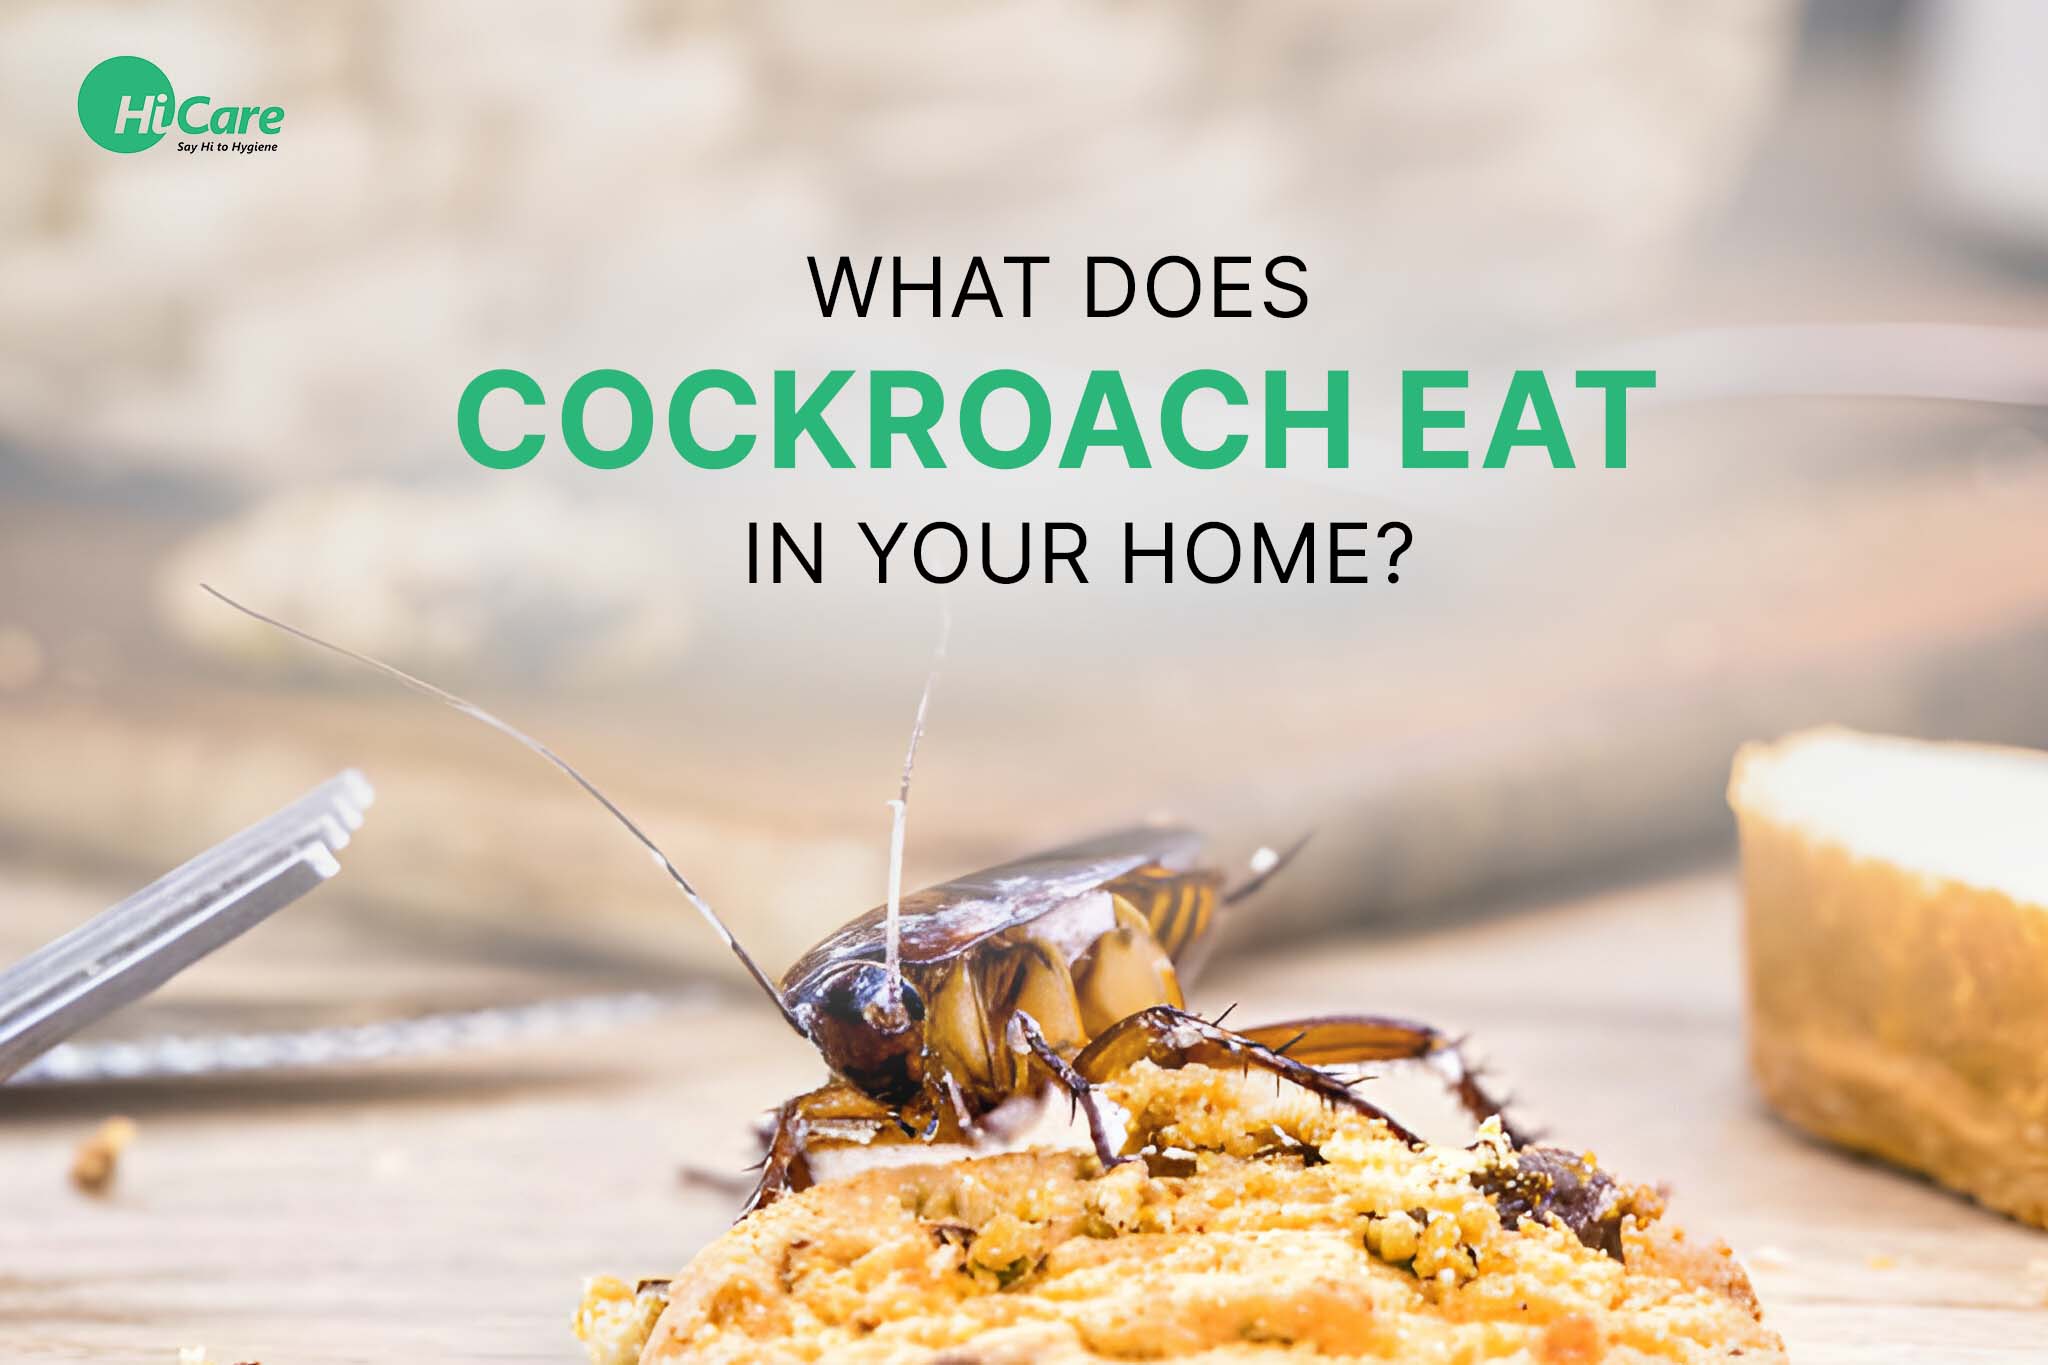 What Does Cockroach Eat in Your Home?